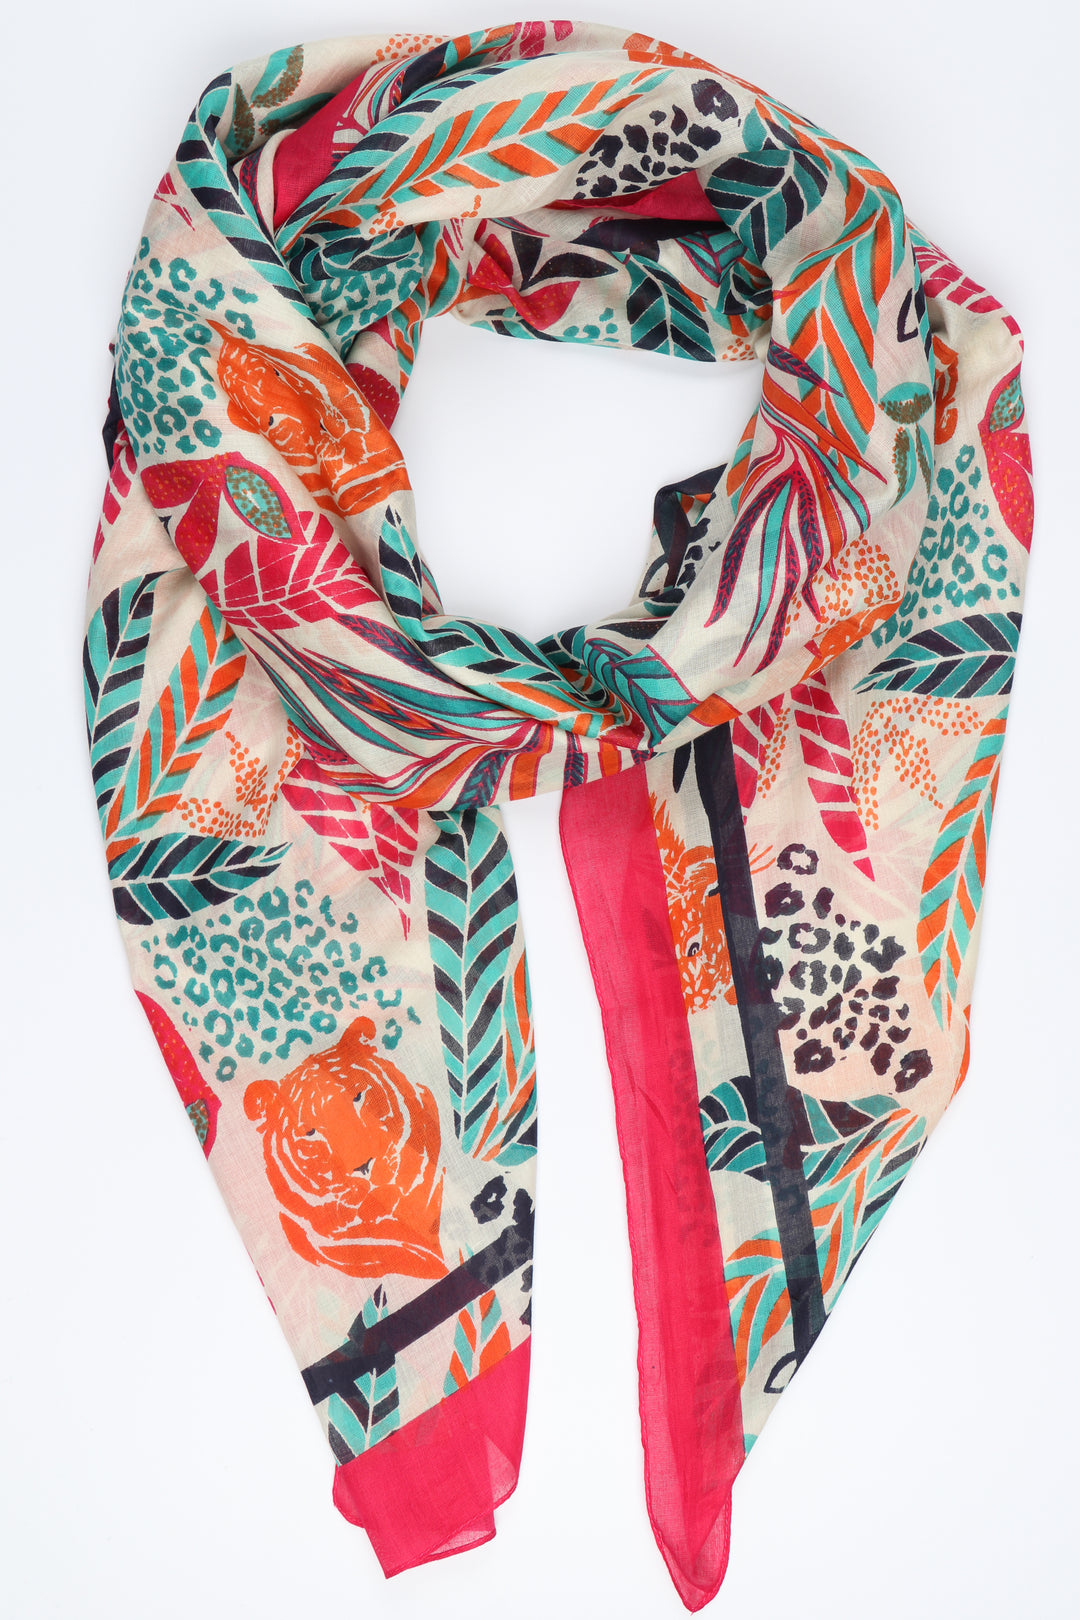 cream, pink, green and orange jungle leaf and tiger head pattern scarf with a pink border 